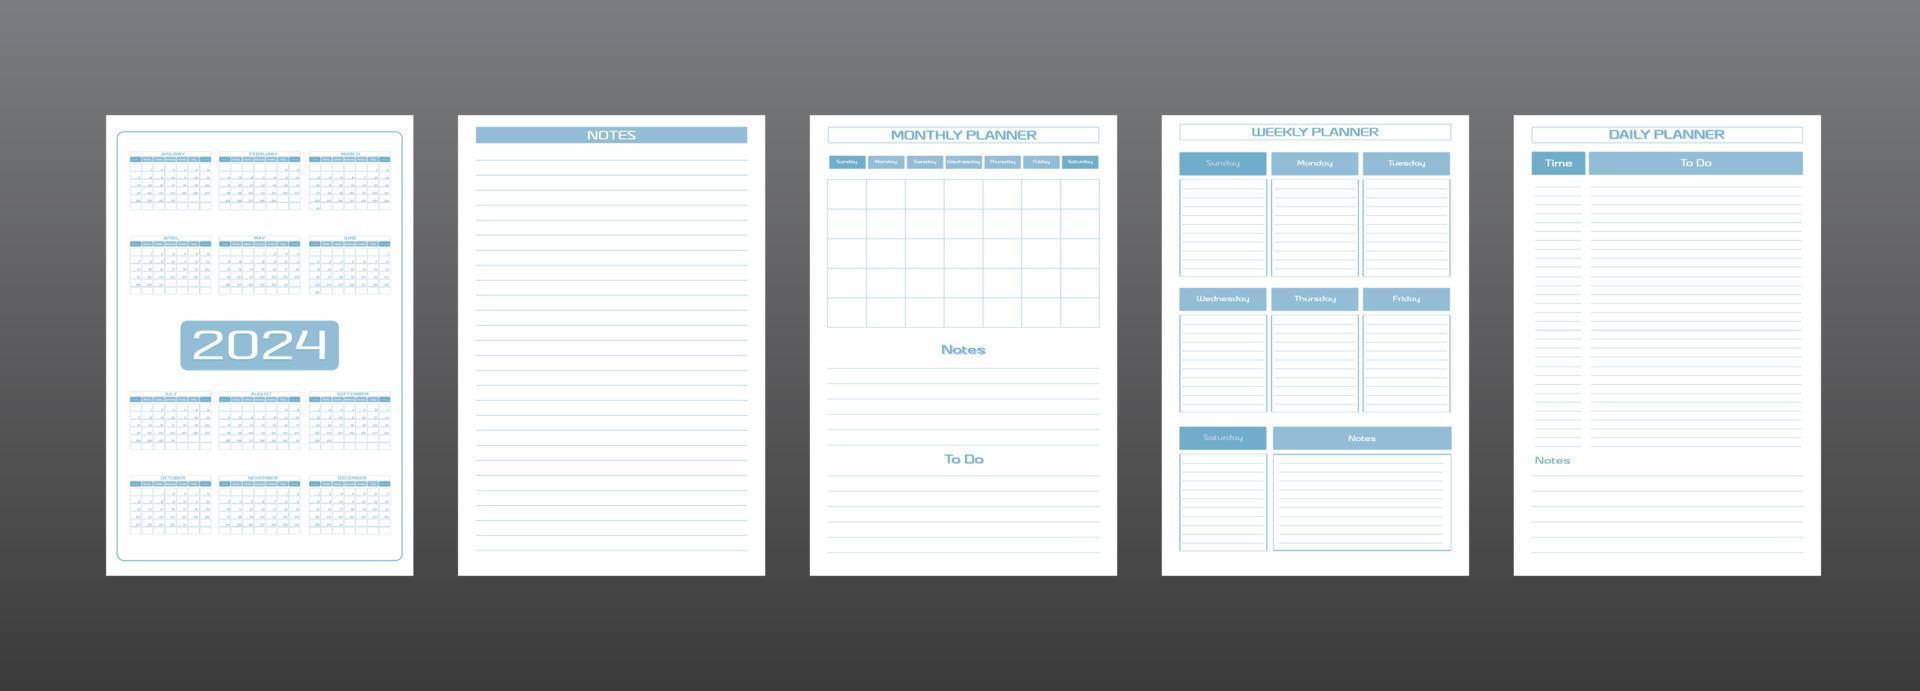 2024 calendar daily weekly monthly personal planner diary template in strict minimalist urban style gray blue color. individual schedule Week starts on sunday vector